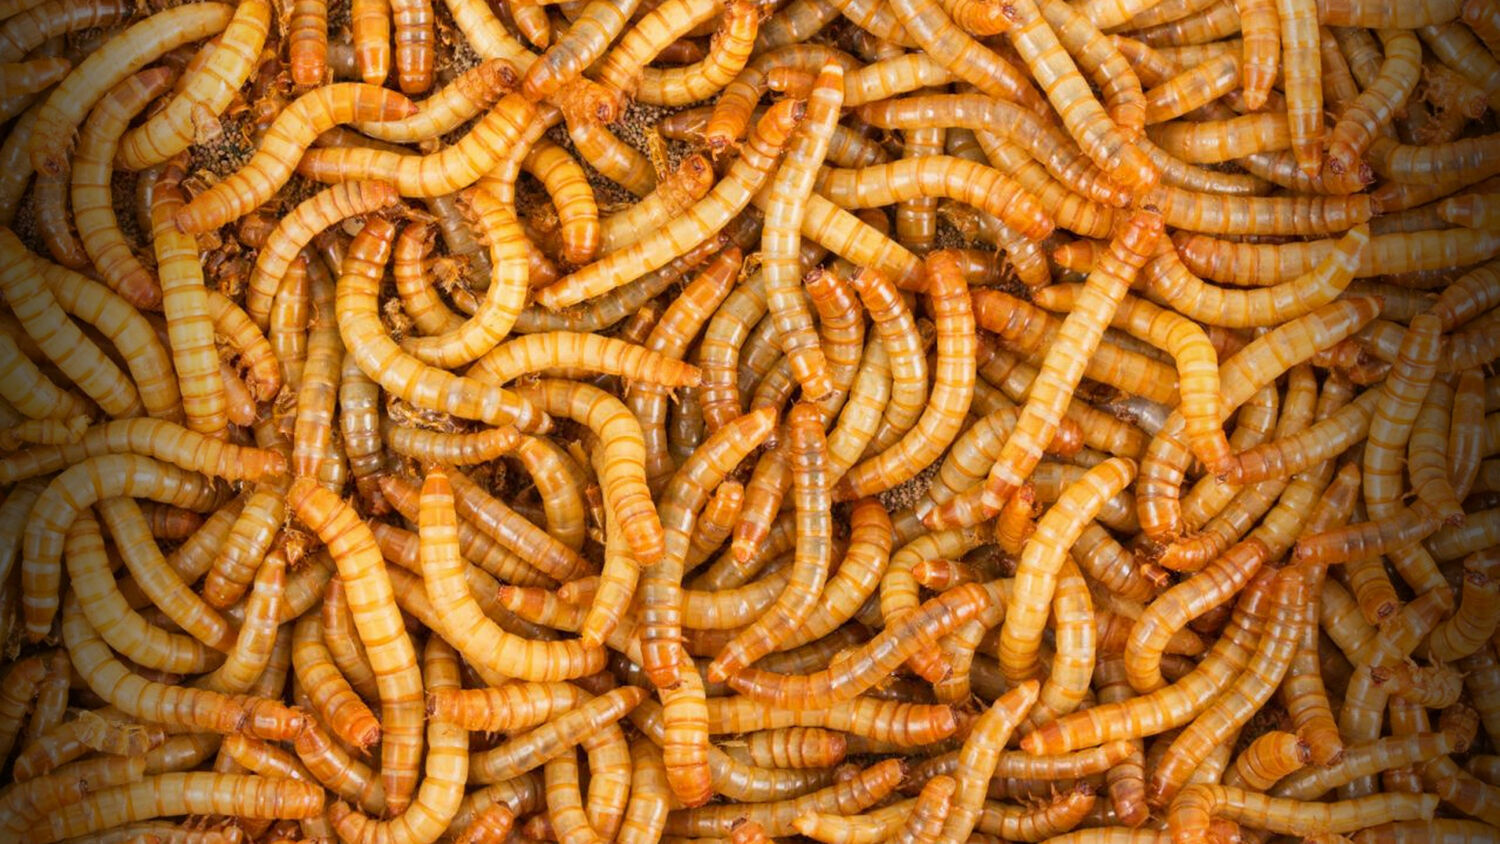 Live Mealworms - 50 - 10,000 - Large 3/4